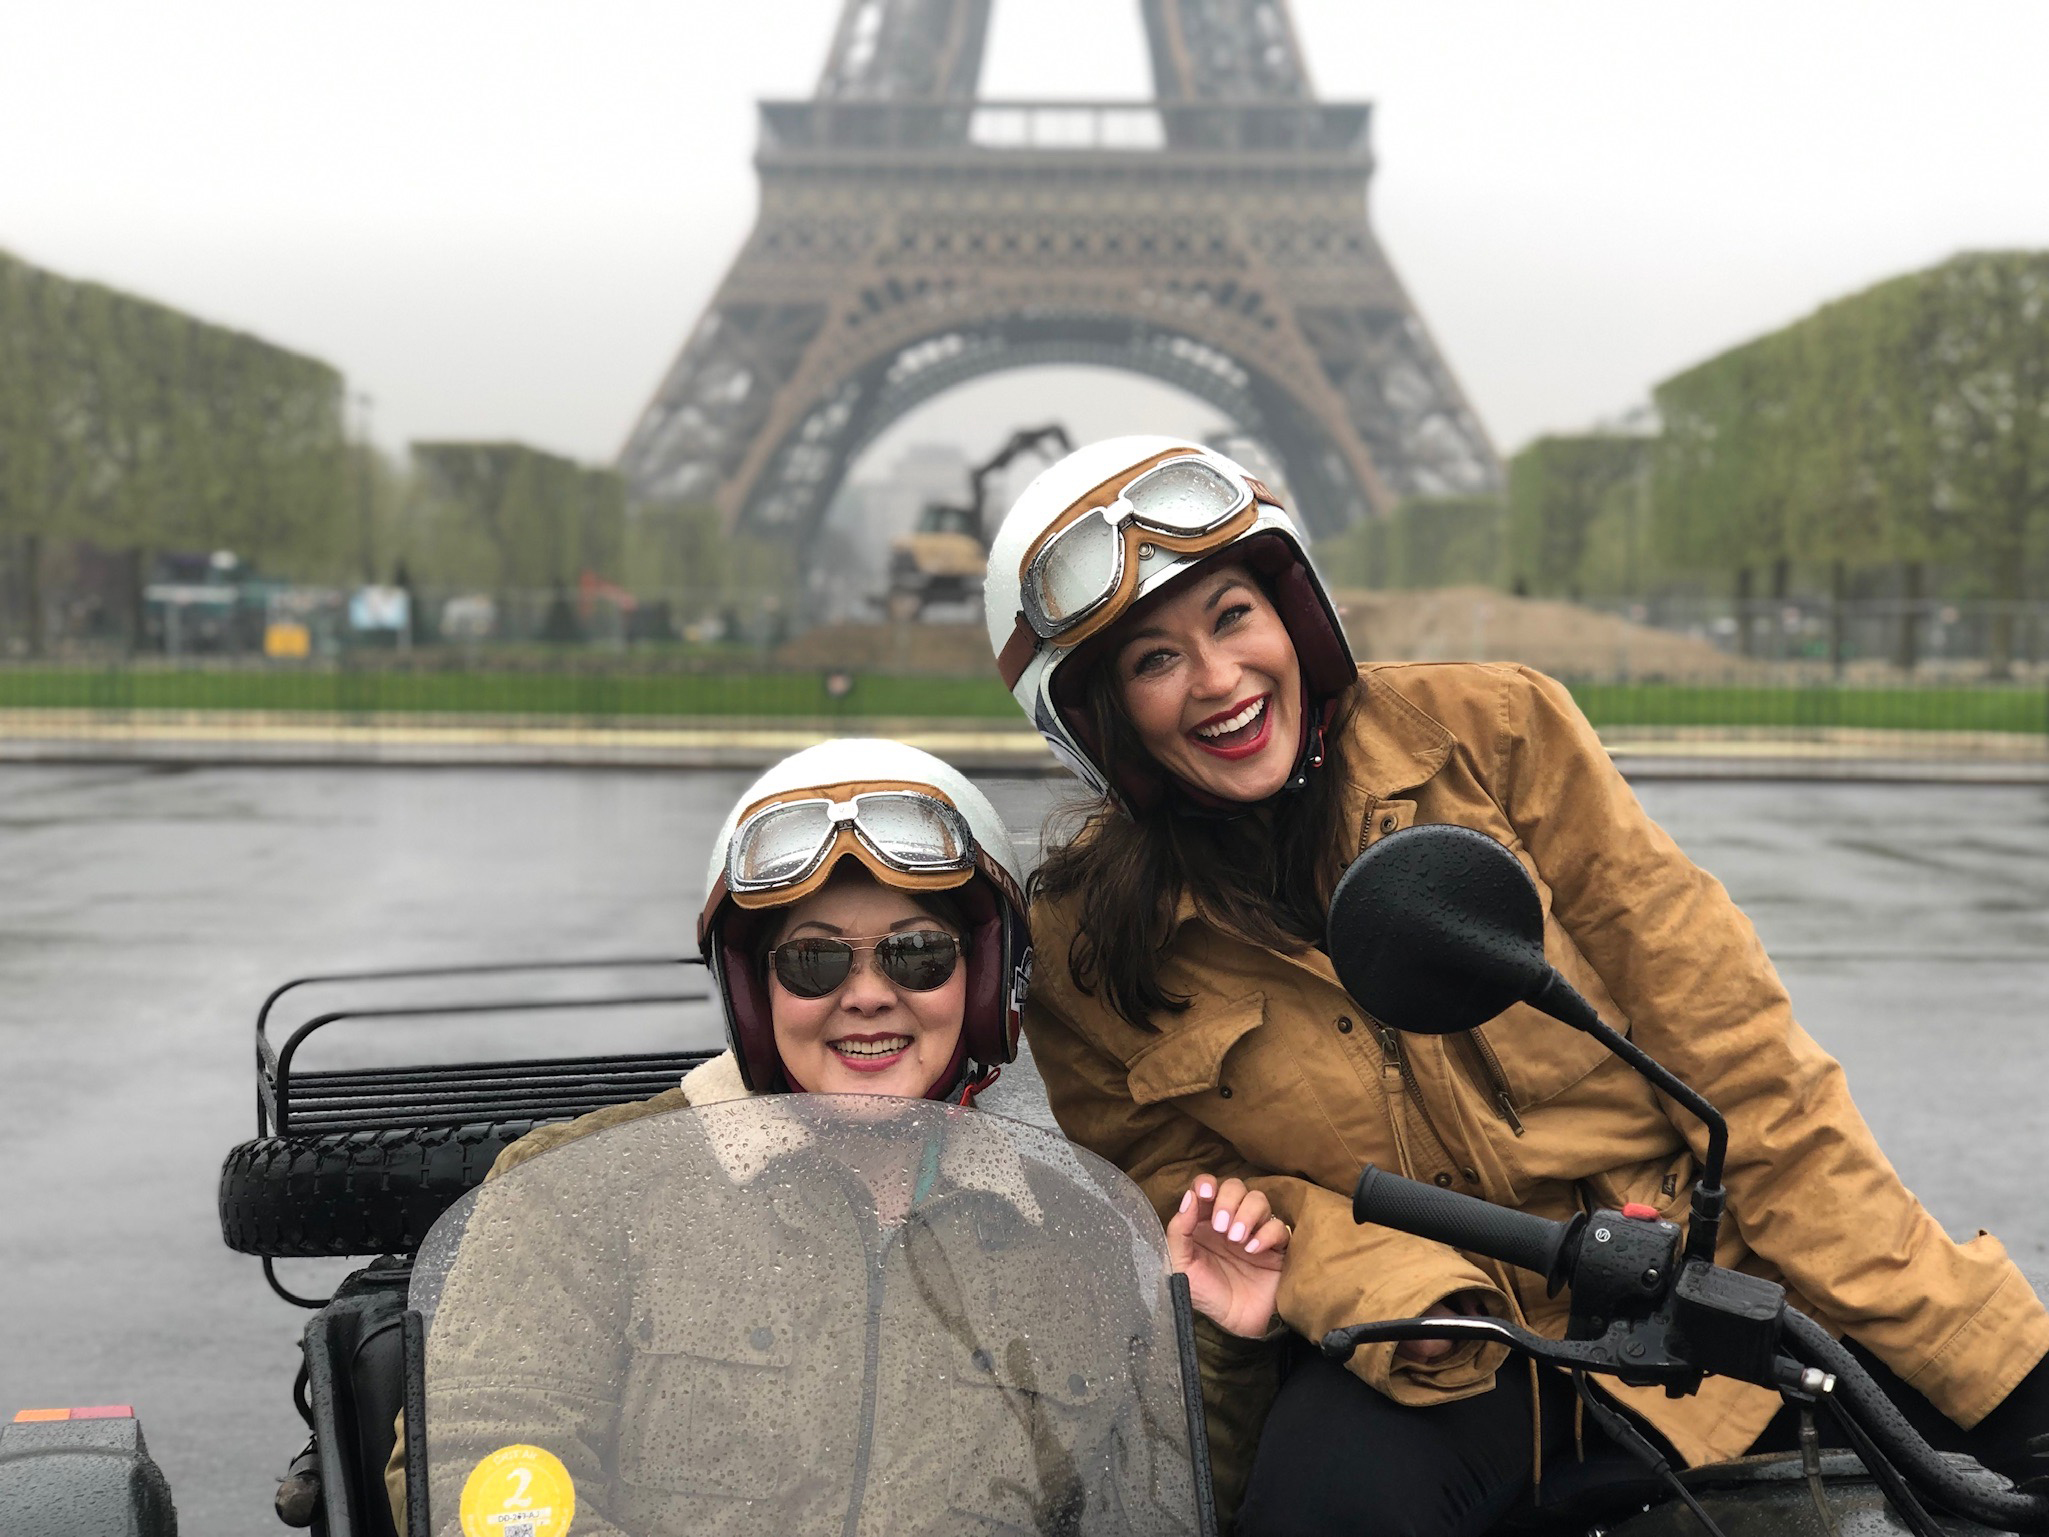 Eva plans a mother-daughter trip every year for two weeks with In Sook Gayle, her mother. Her favorite vacation was their most recent jaunt to Paris, London, and Amsterdam. With an adventurous spirit, they toured Paris by motorbikes.